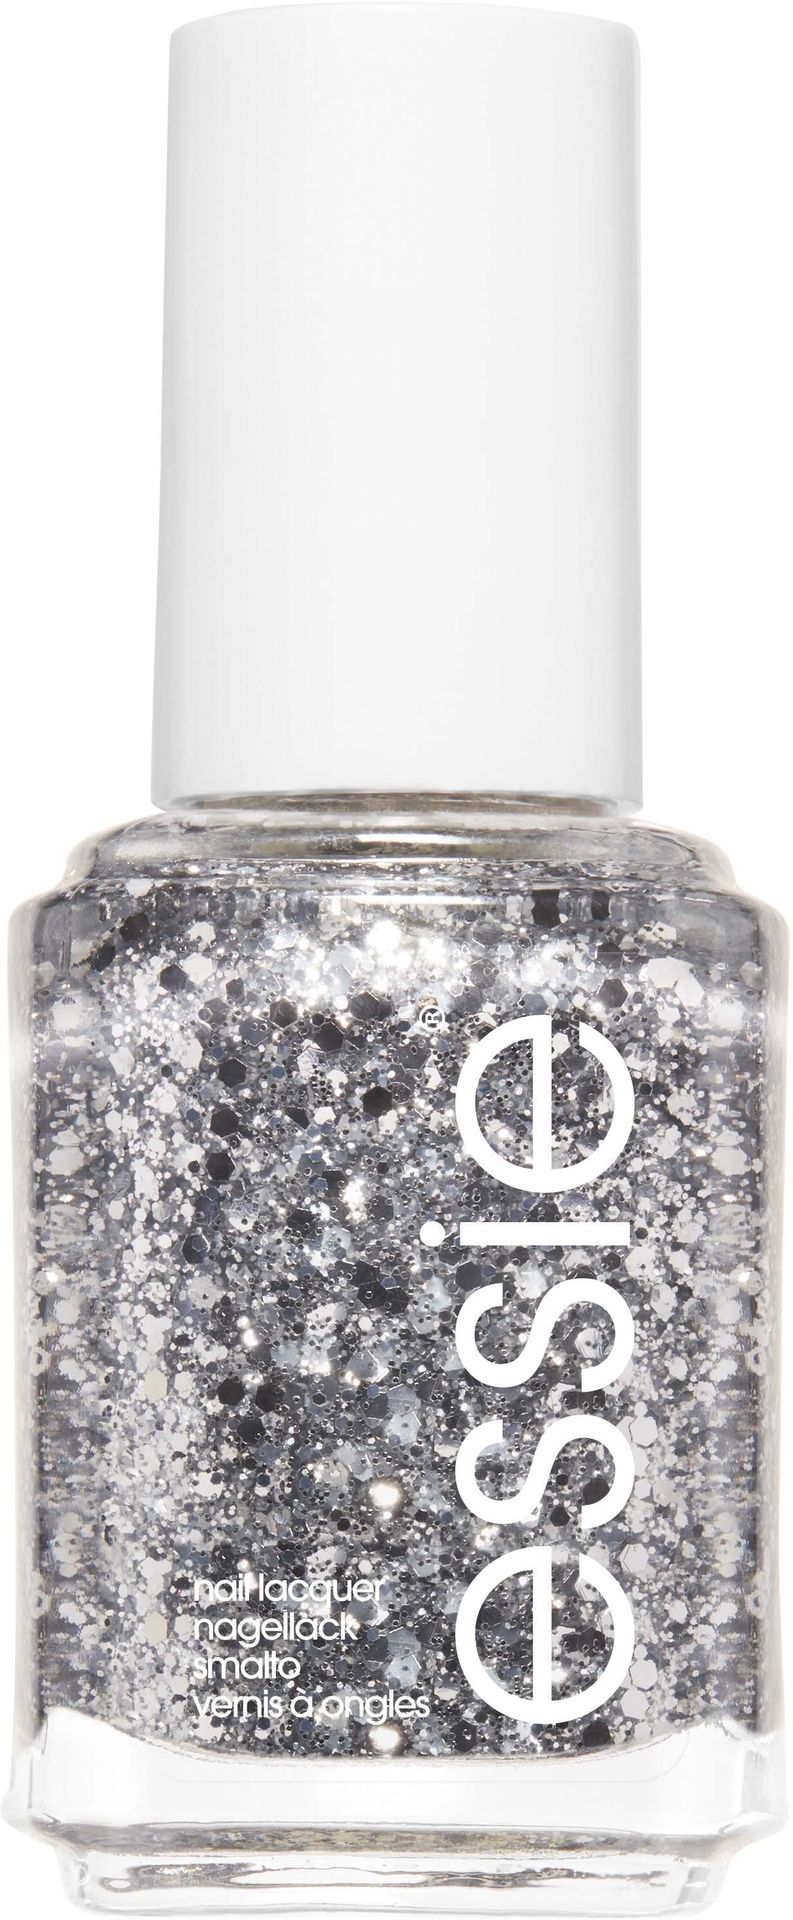 Essie Luxe Effects Nailpolish Set In Stones 278